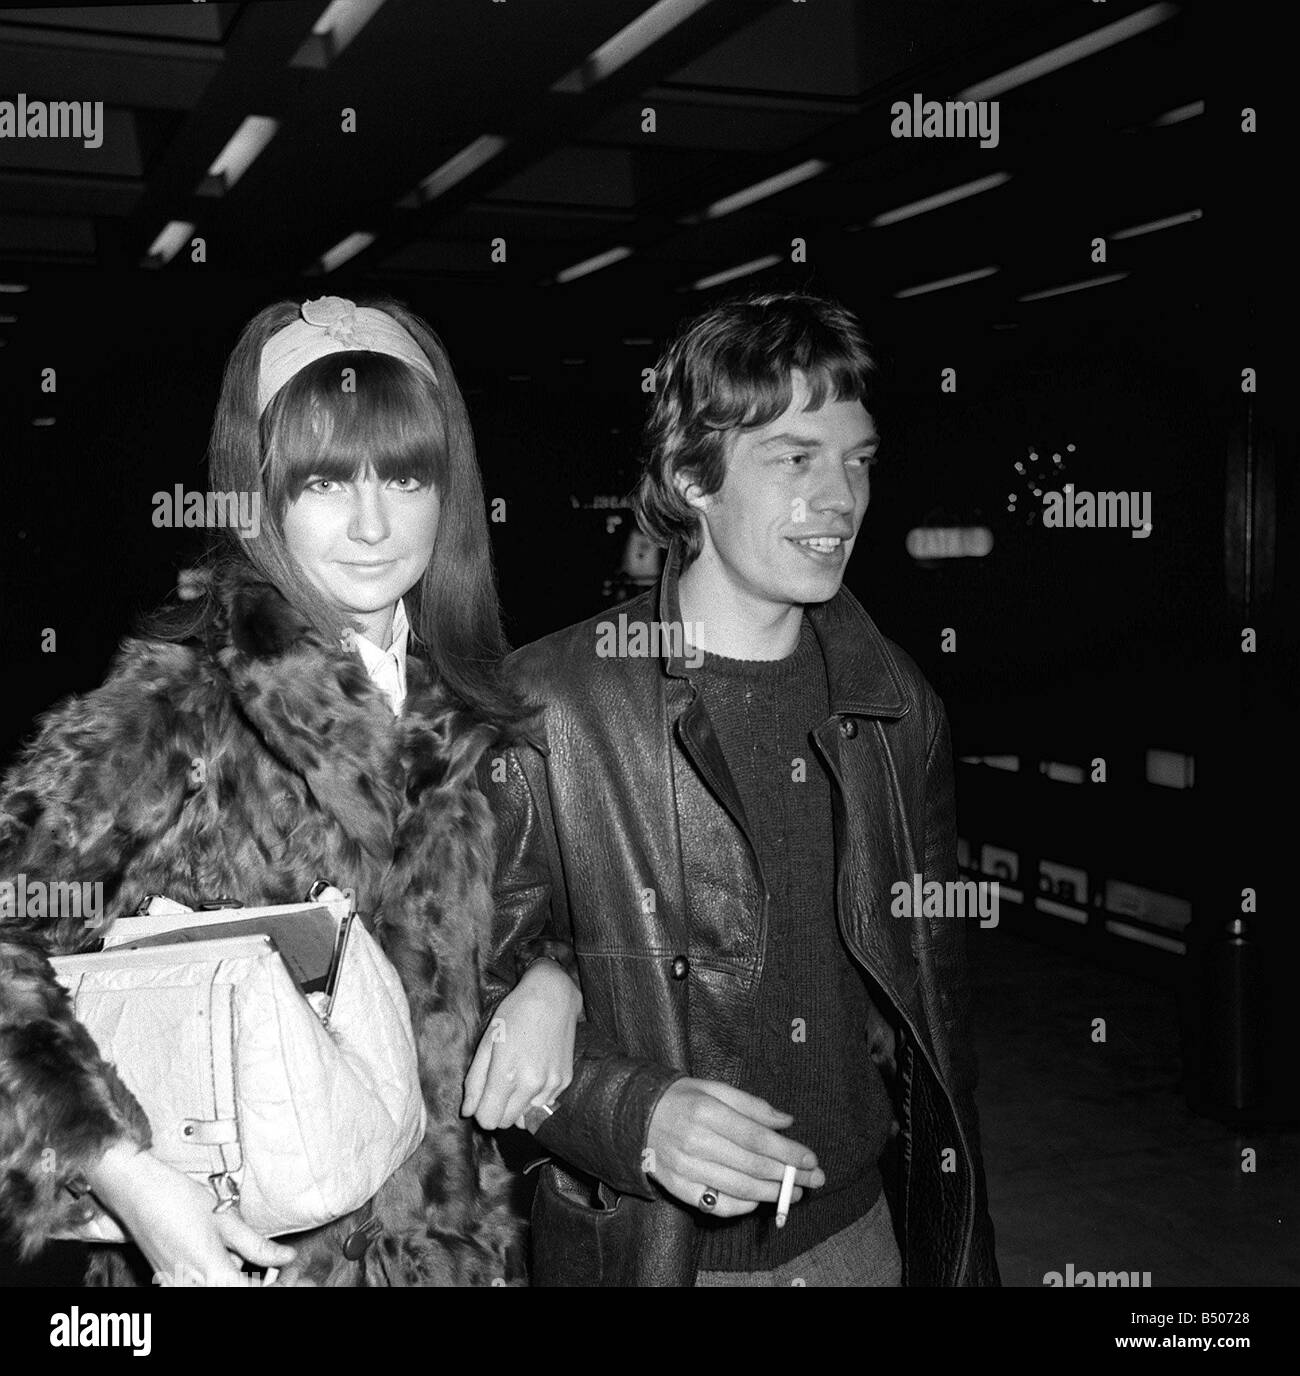 Chrissie Shrimpton and Mick Jagger singer with the Rolling Stones Stock Photo